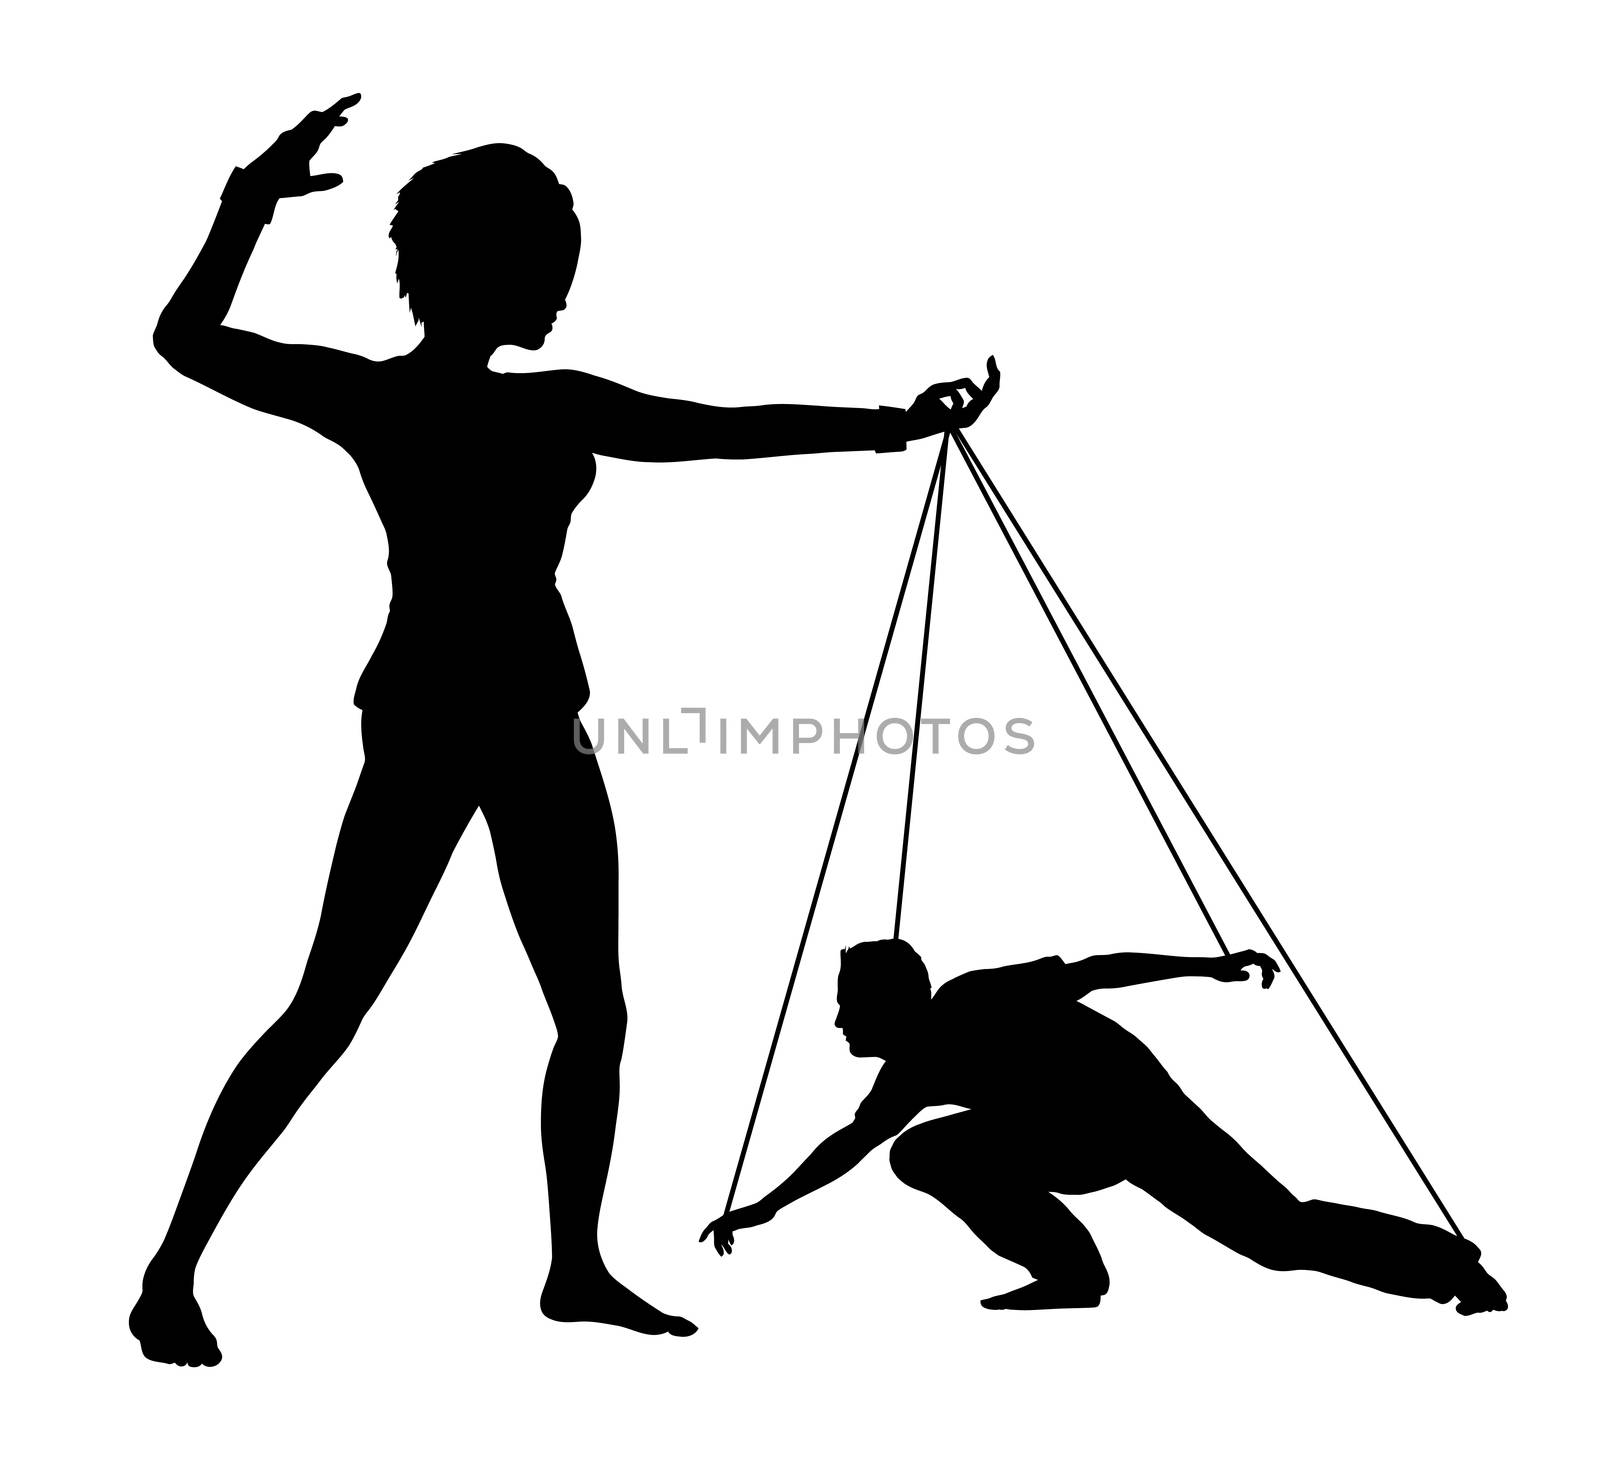 Woman treating man like marionette, concept sign of humiliation and domination